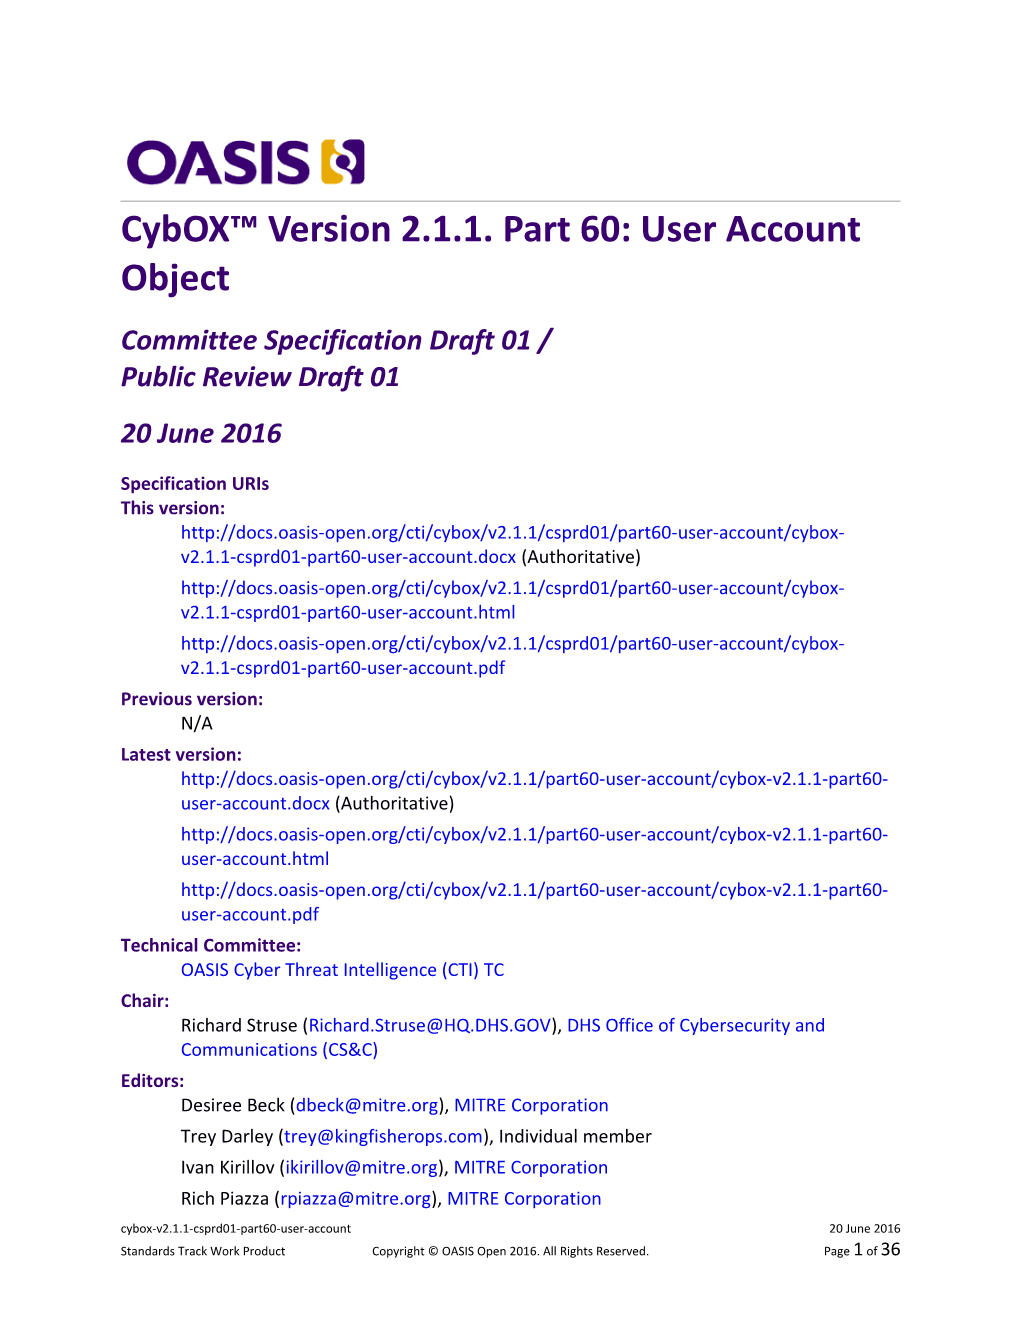 Cybox Version 2.1.1. Part 60: User Account Object